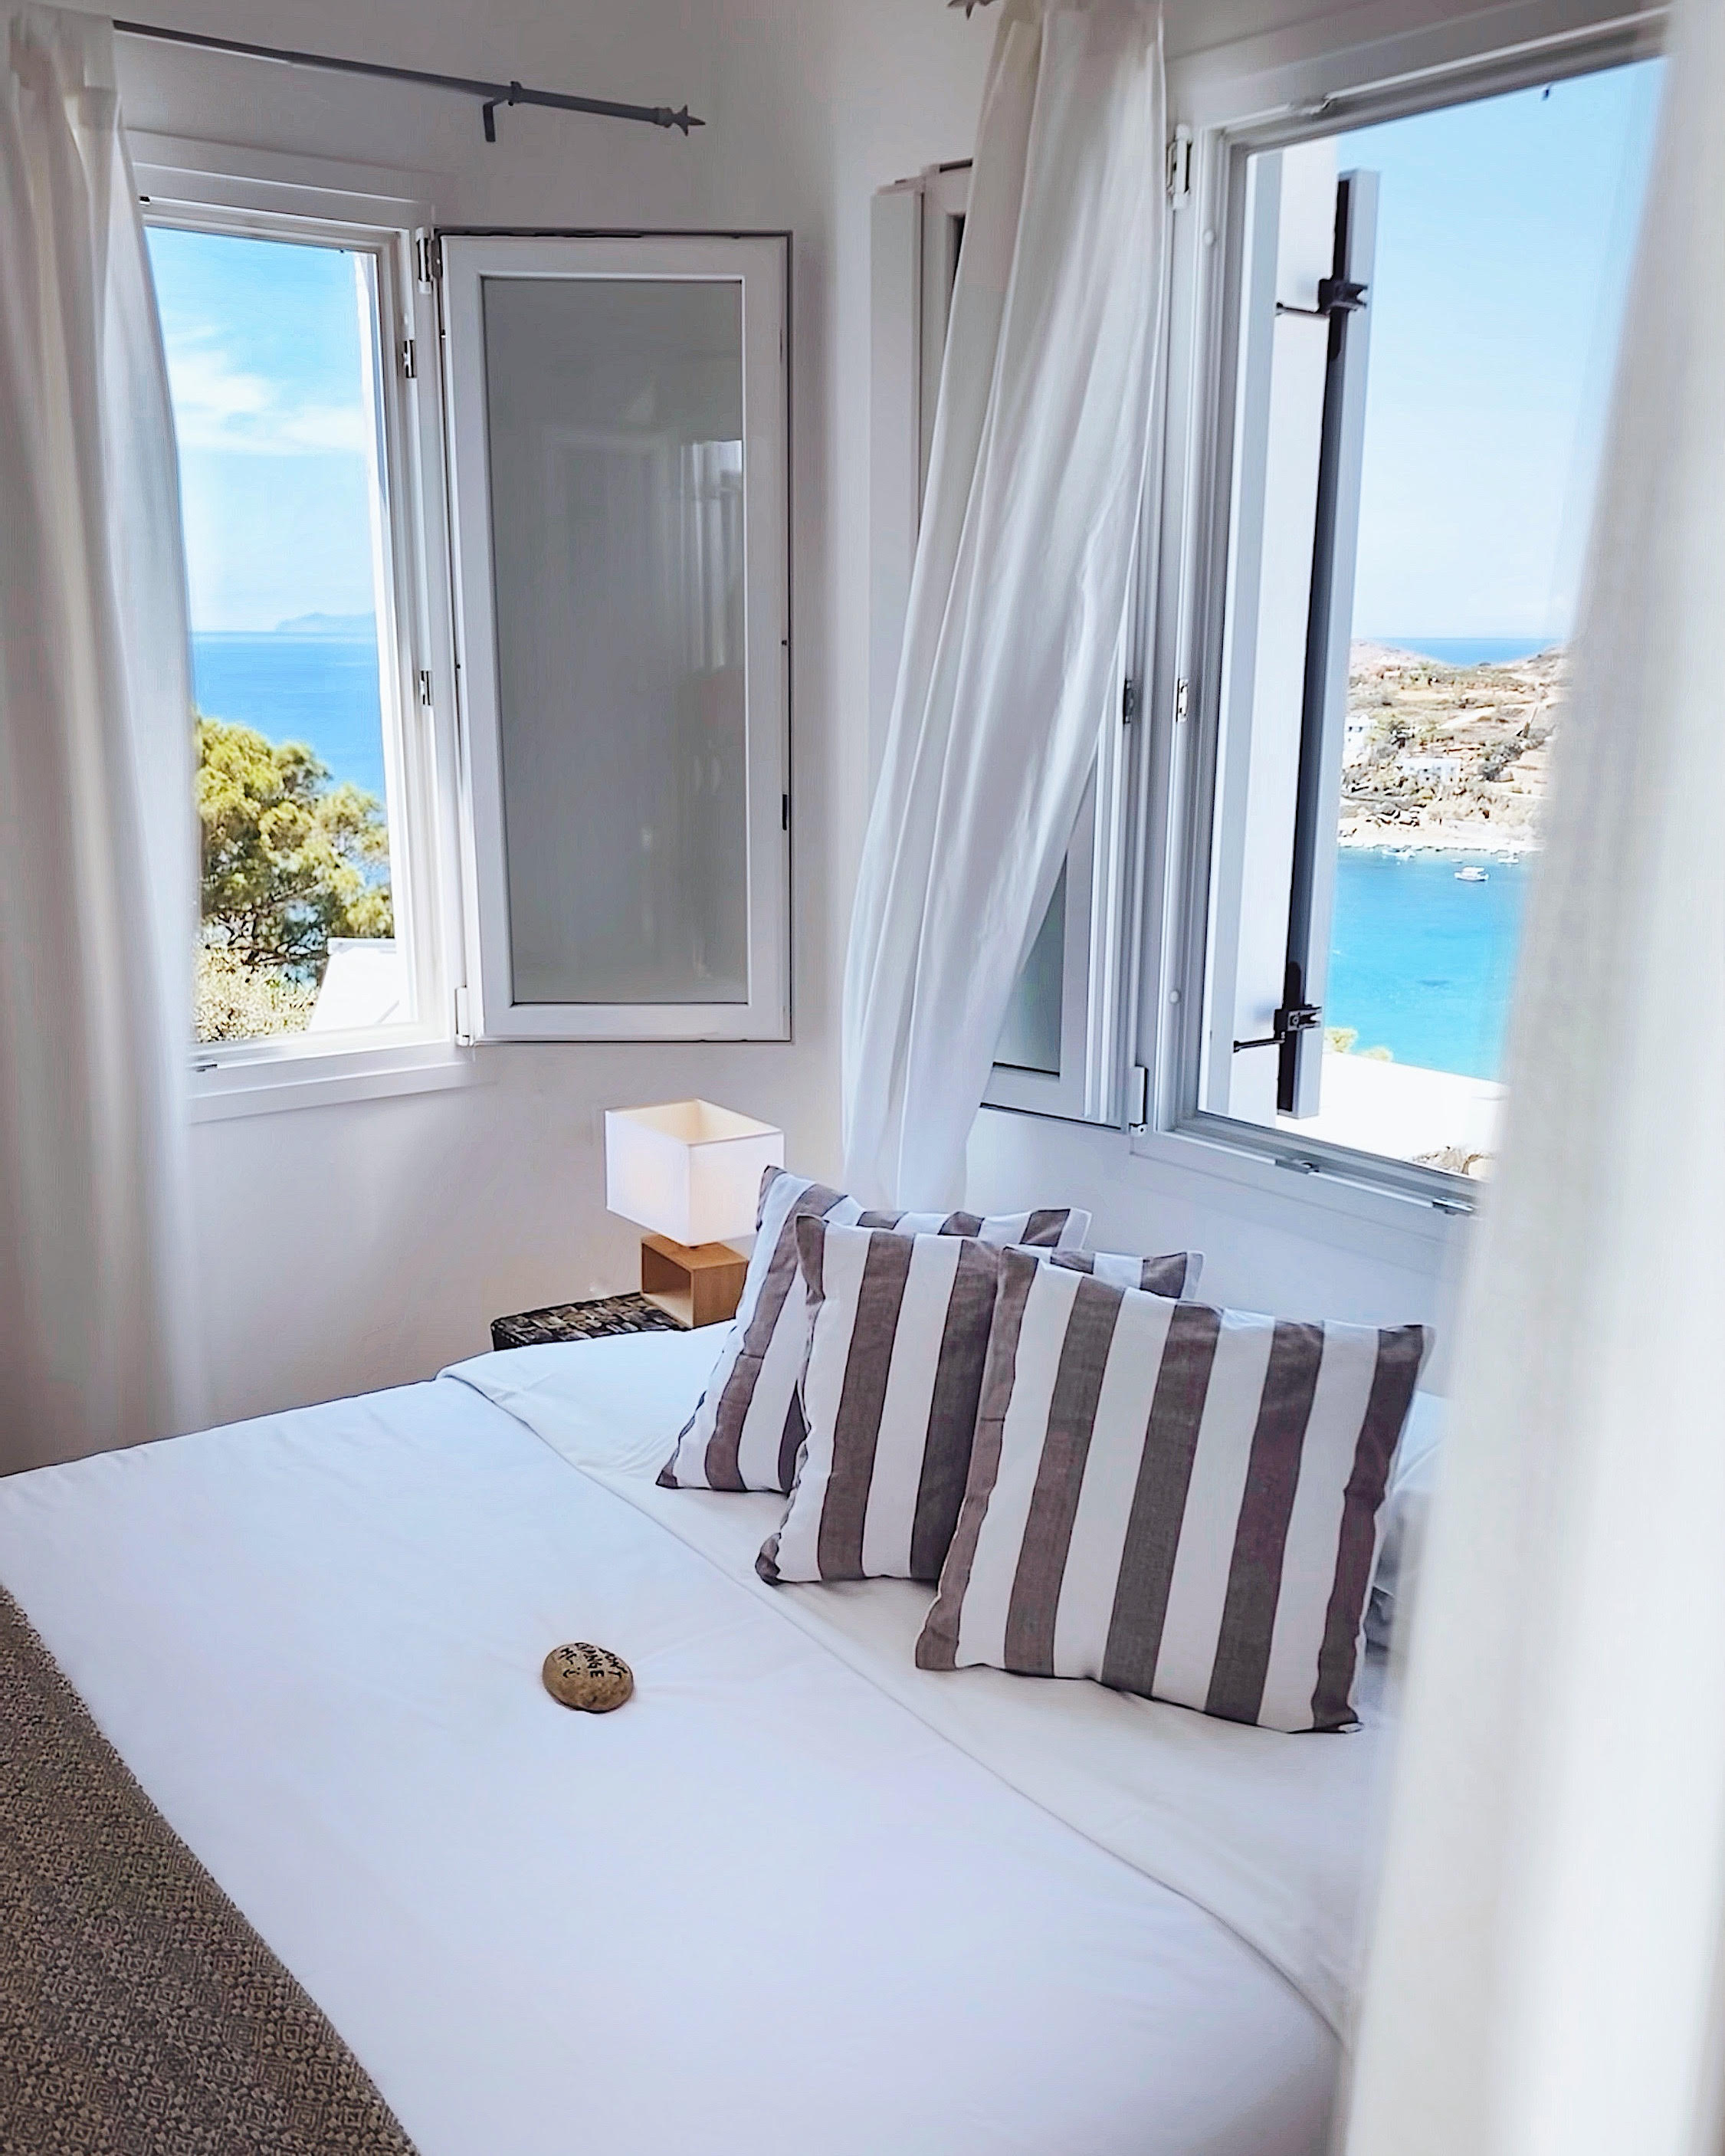 Check out this amazing views from a room at this Syros Hotel in Greece called Pino Di Loto.